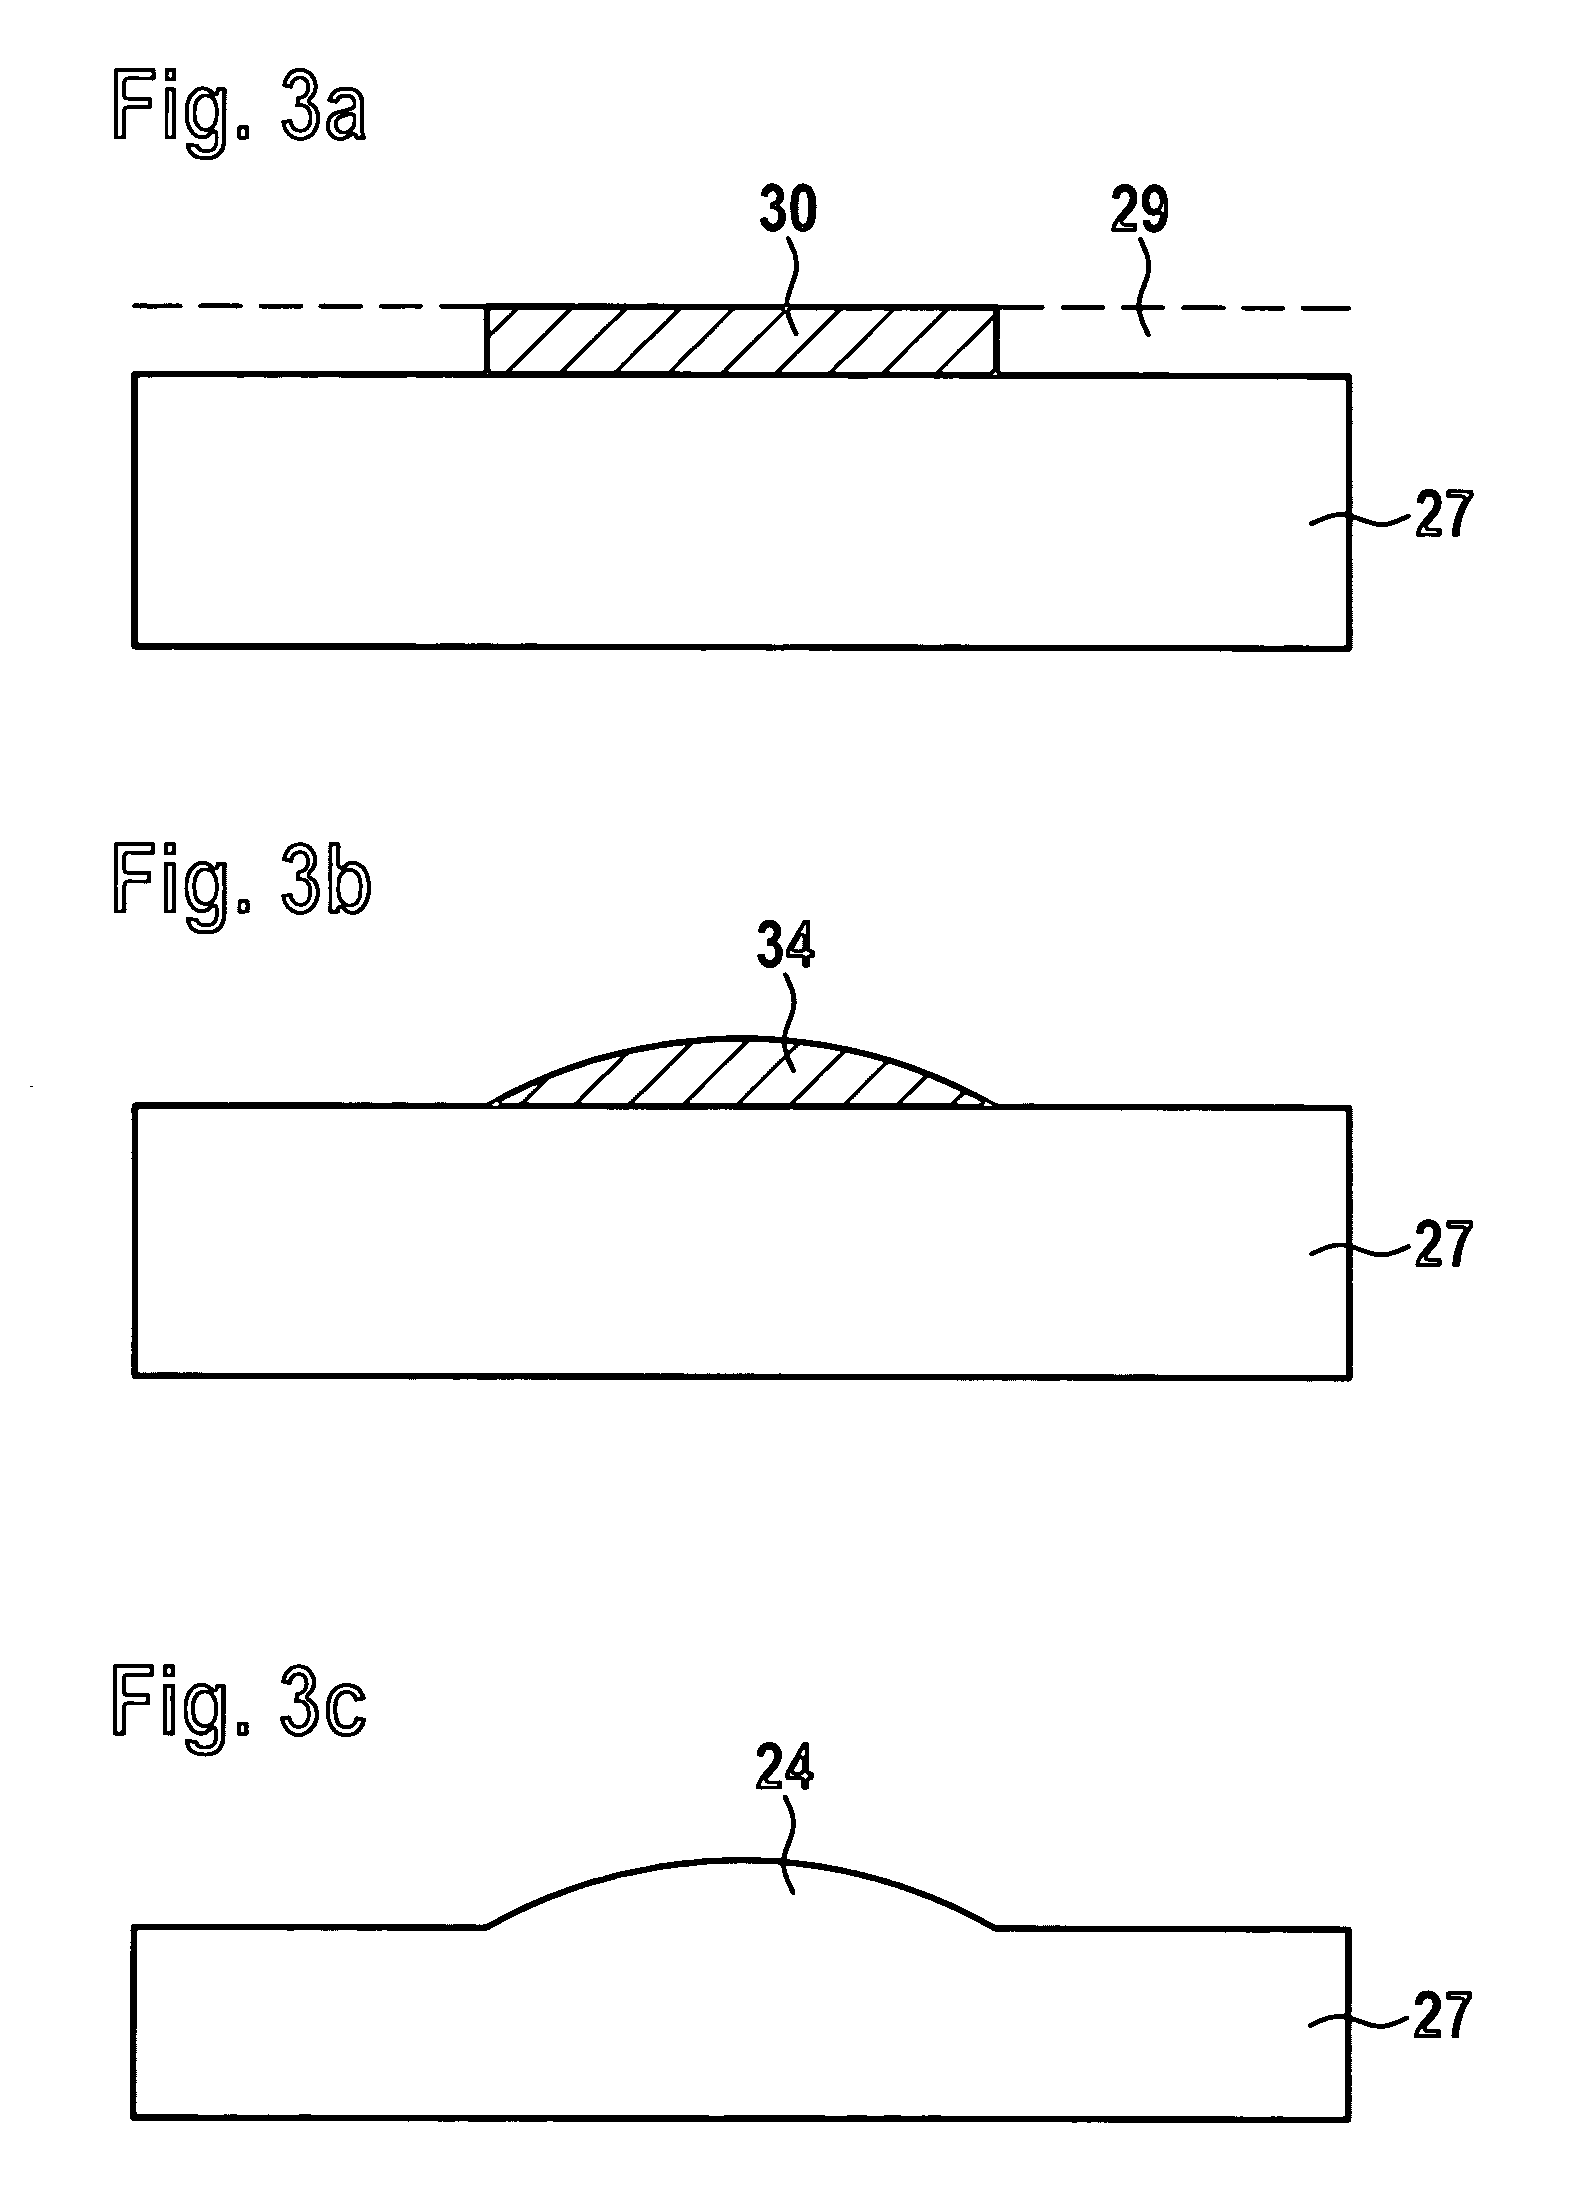 Microstructured infrared sensor and method for its manufacture